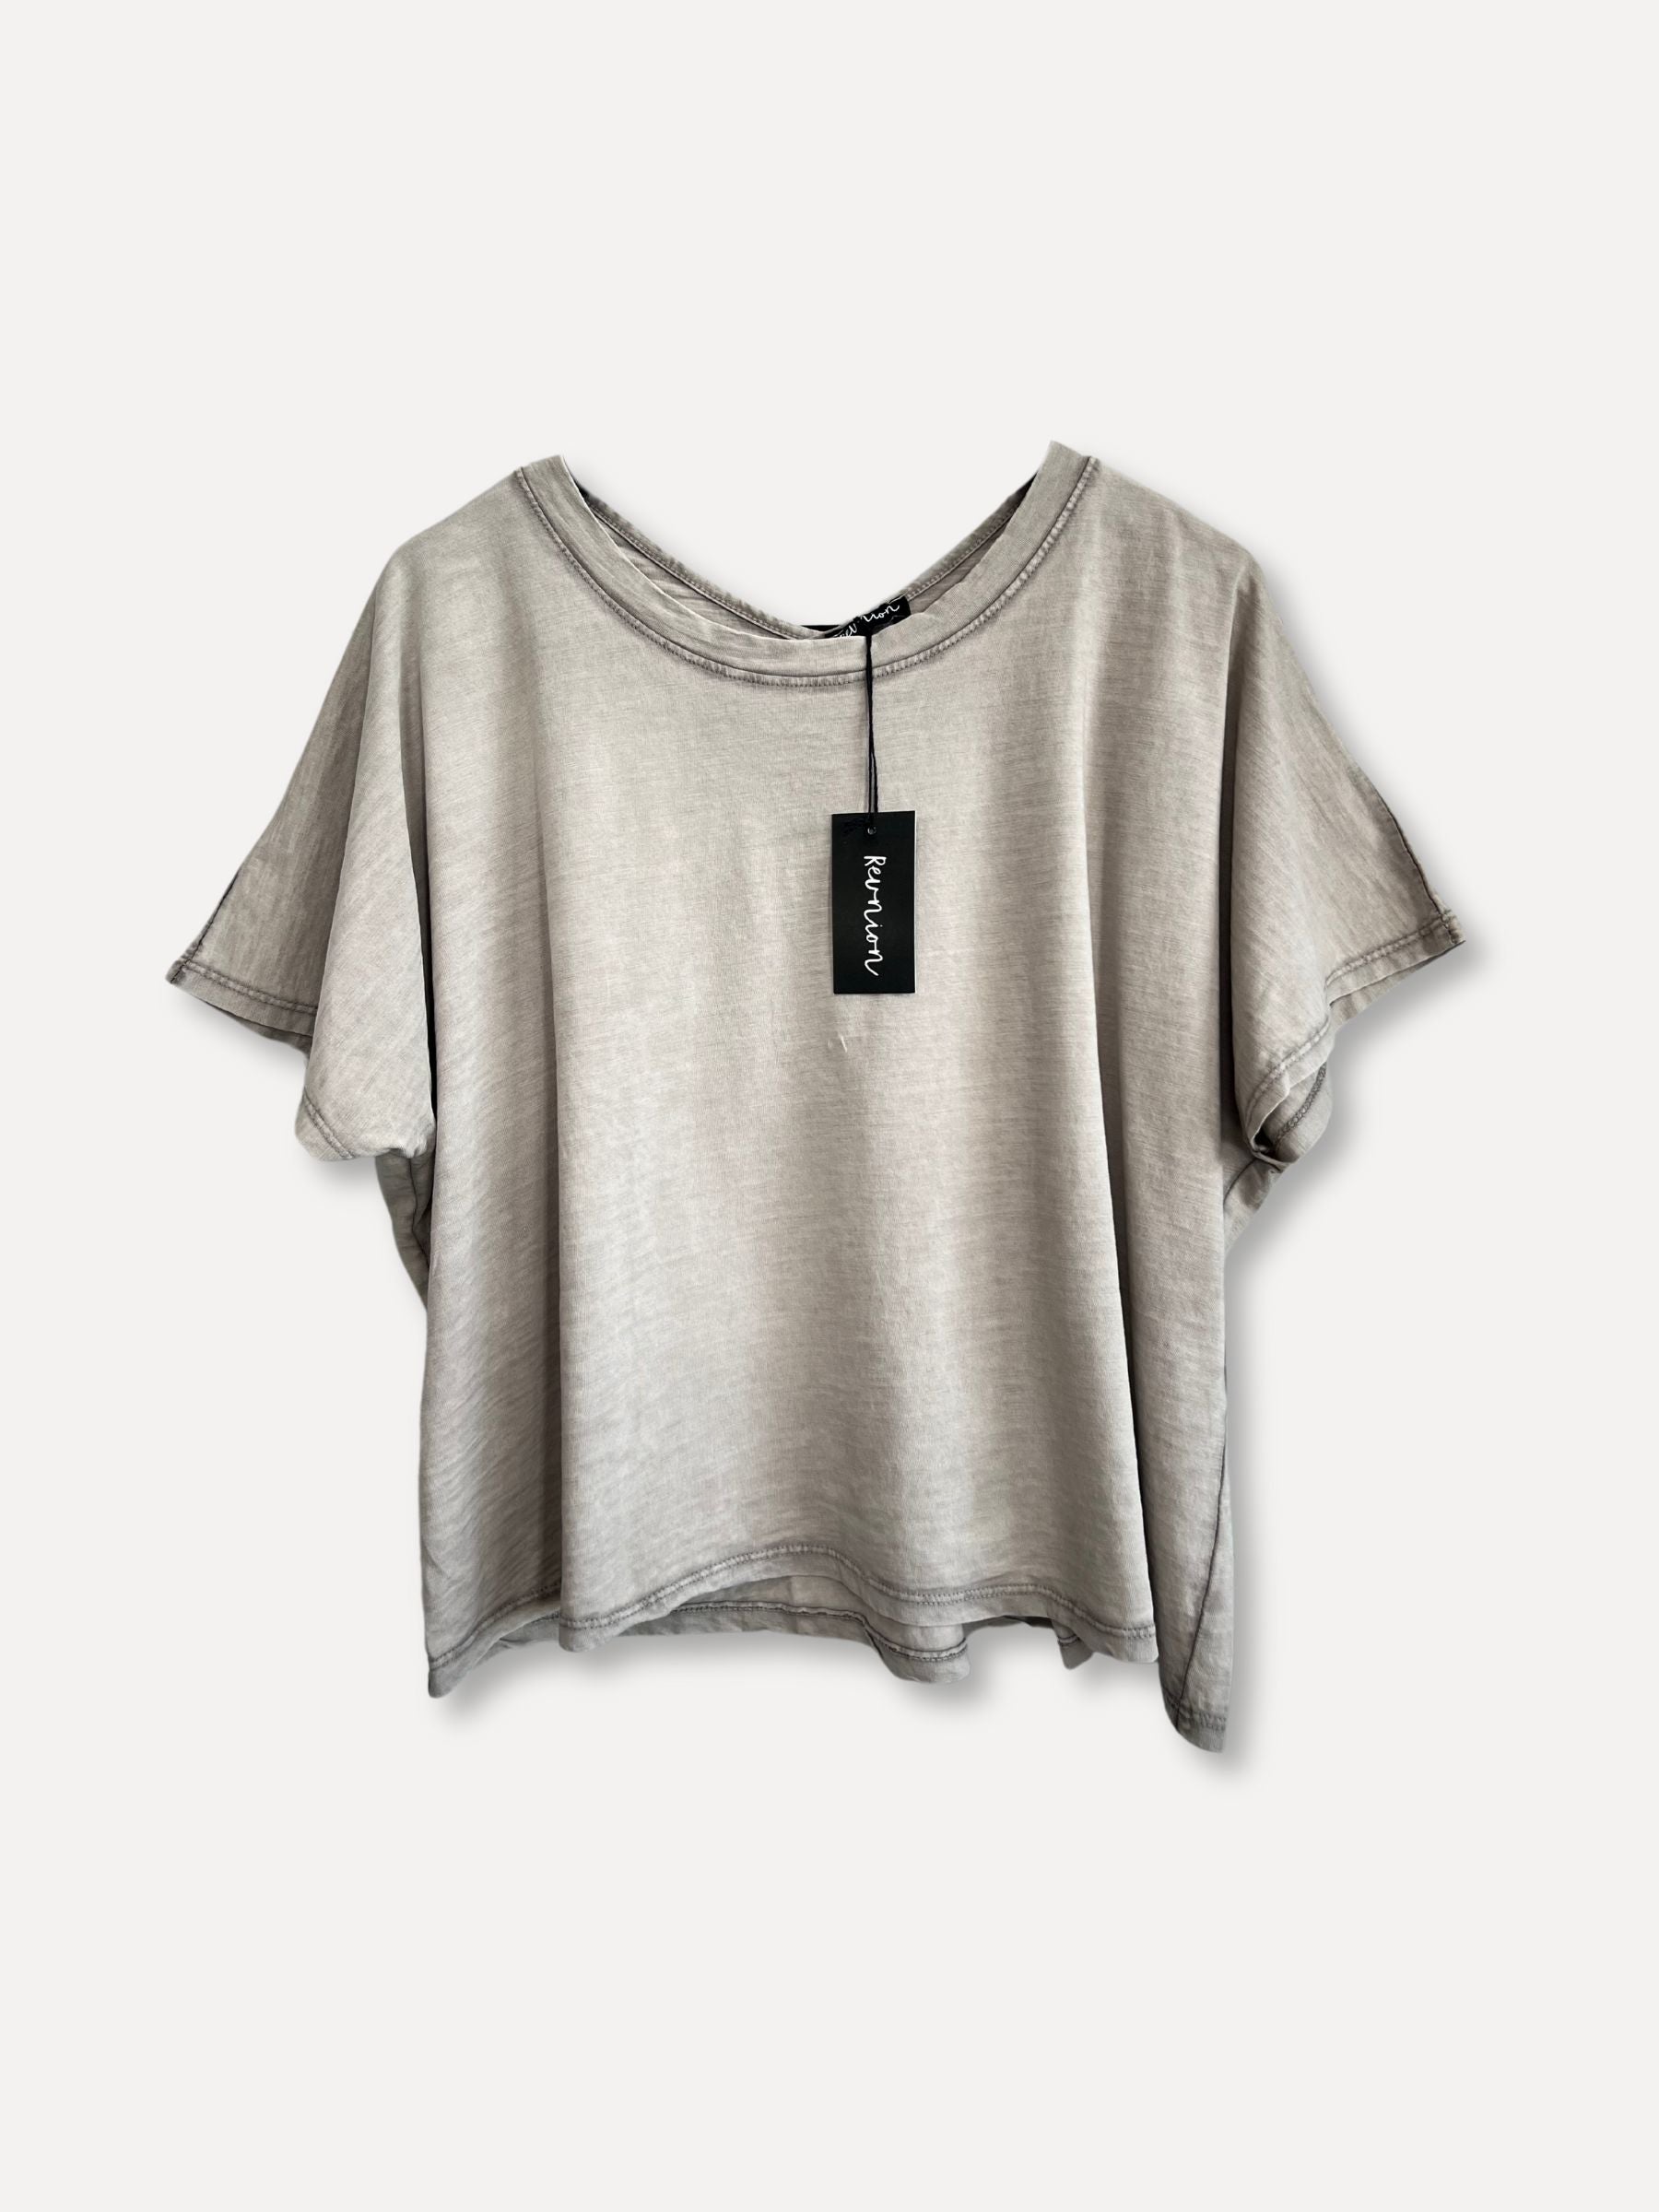 Boxing Cotton T-Shirt, Taupe